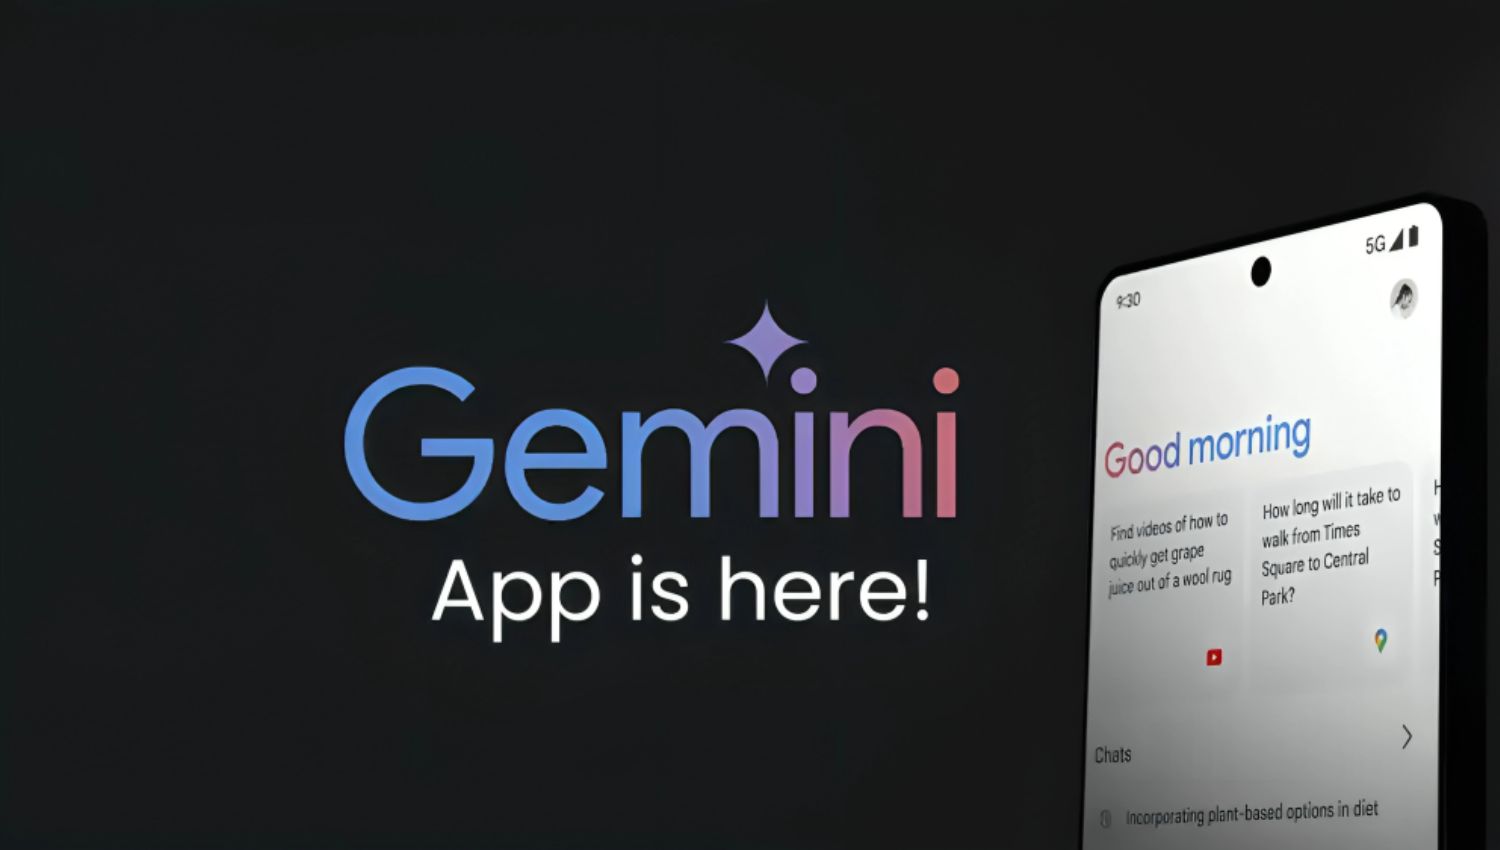 Gemini Mobile App Launches in India: Now Available in Hindi, Bengali, and 7 Other Indian Languages.